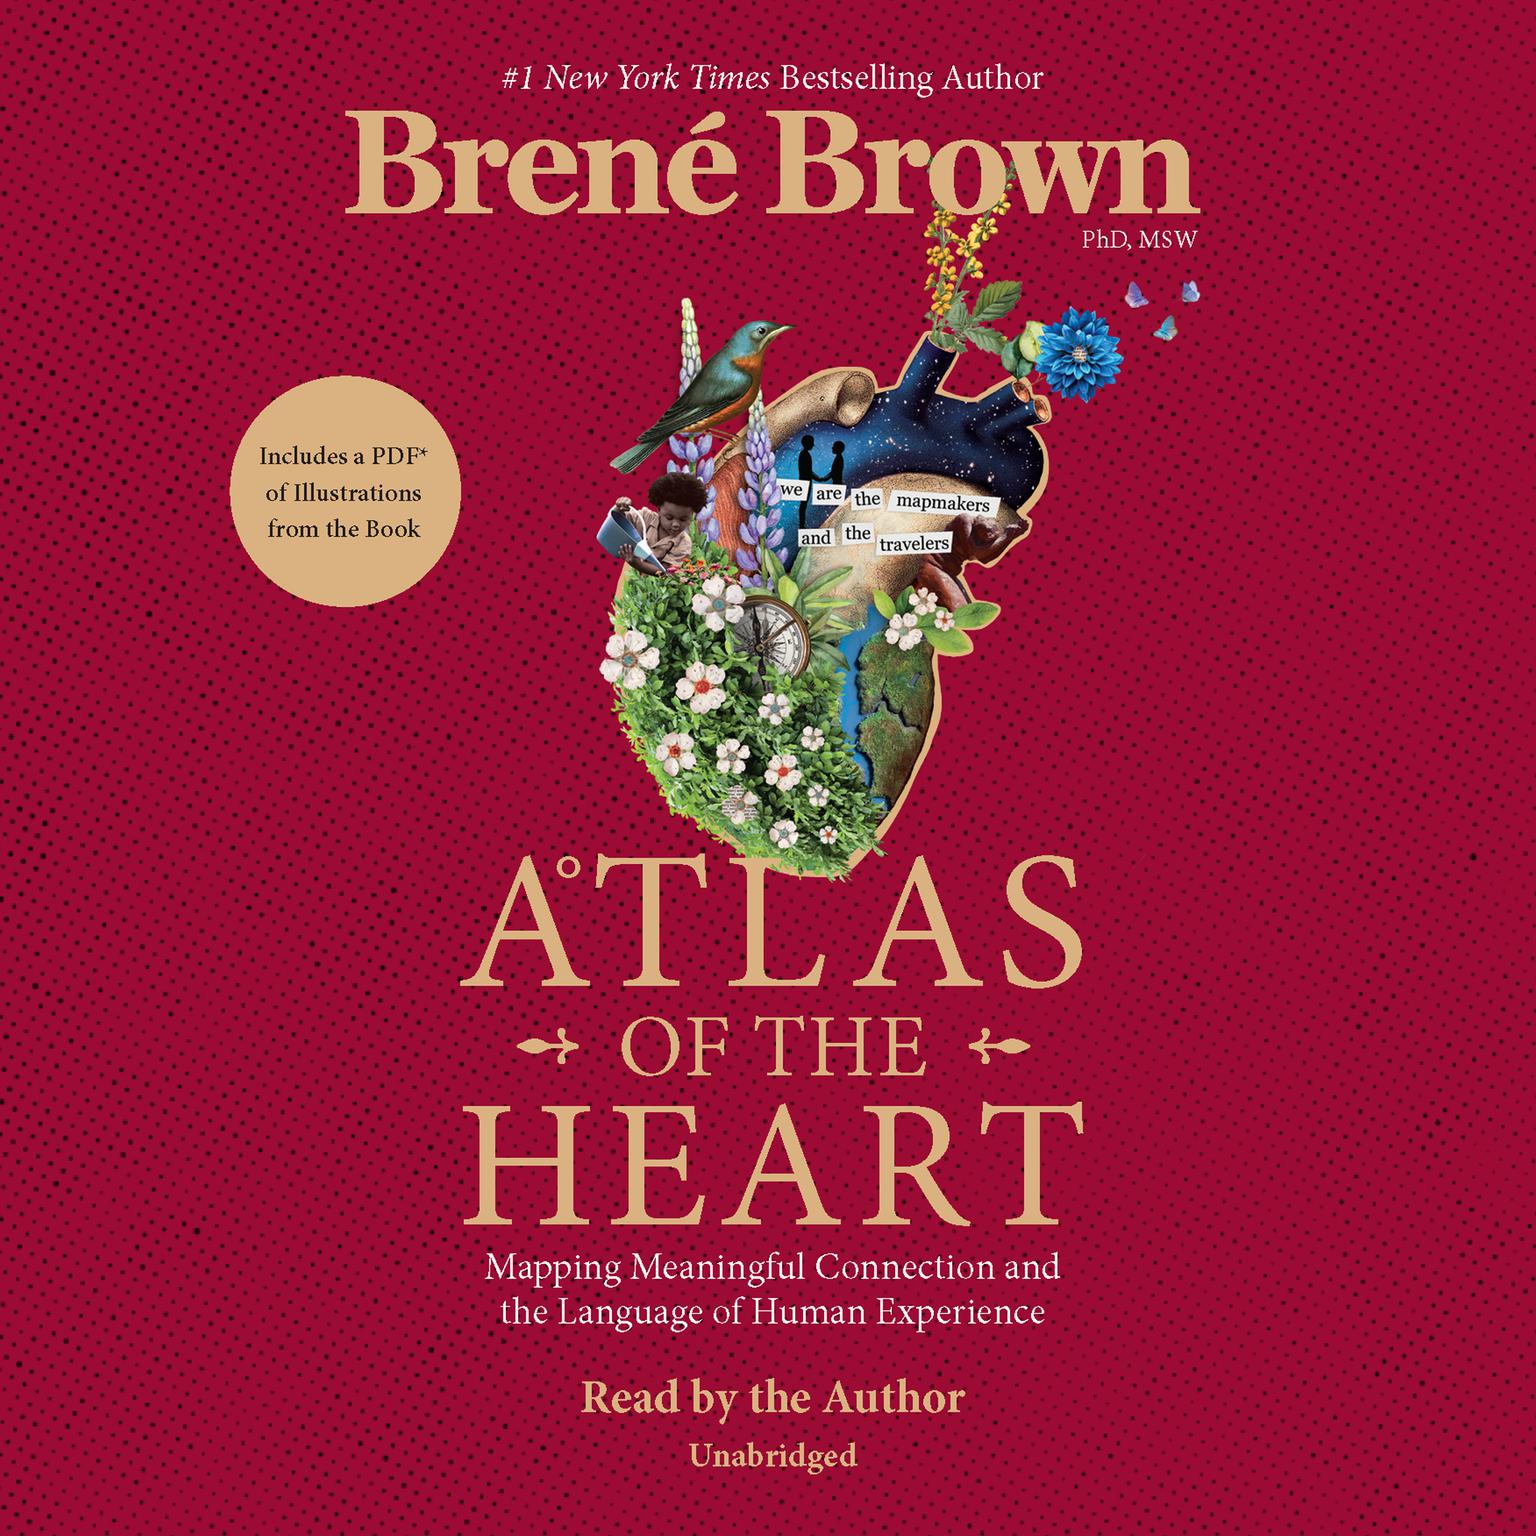 Atlas of the Heart: Mapping Meaningful Connection and the Language of Human Experience Audiobook, by Brené Brown